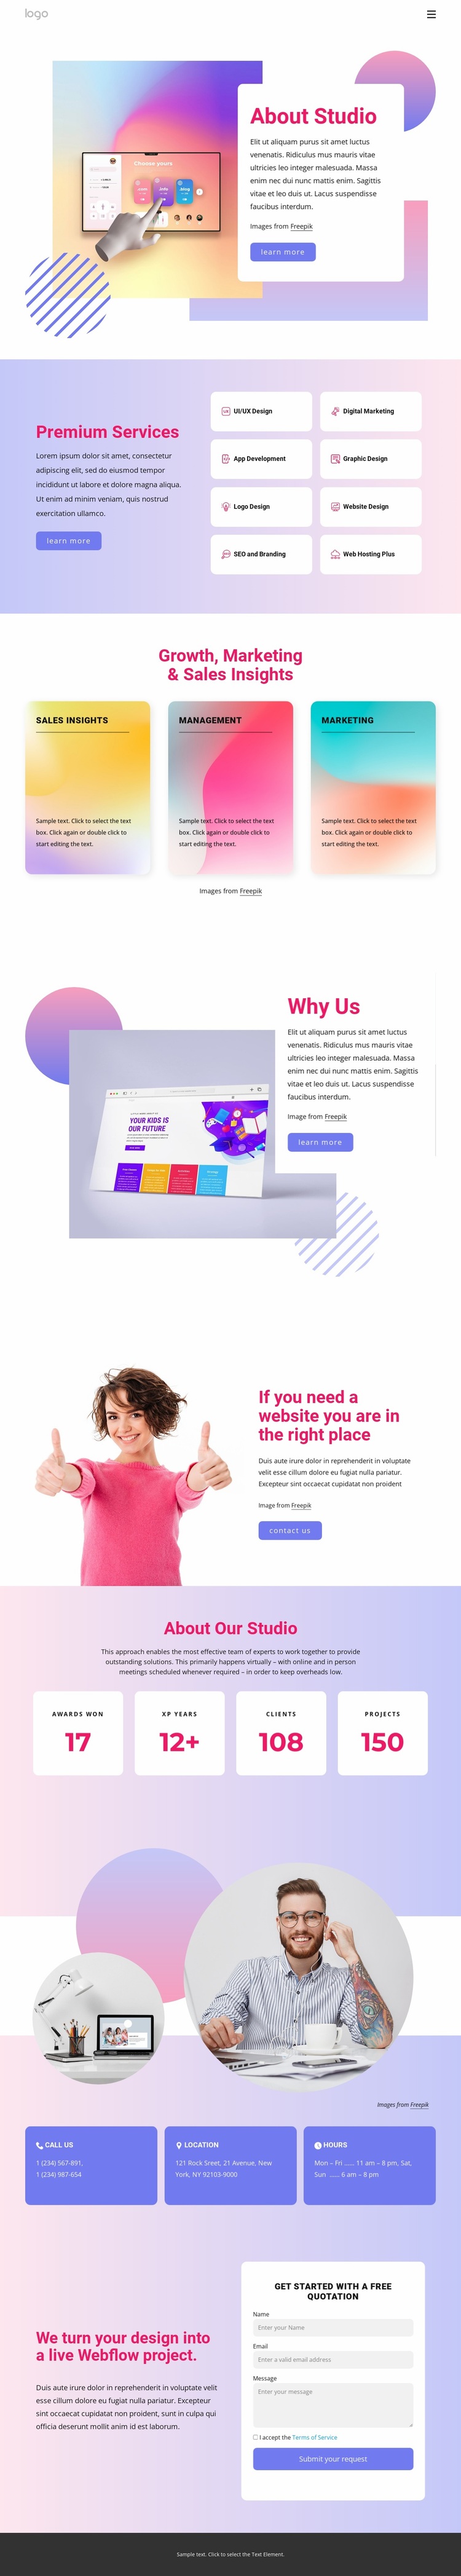 Growth, marketing and sales Website Design